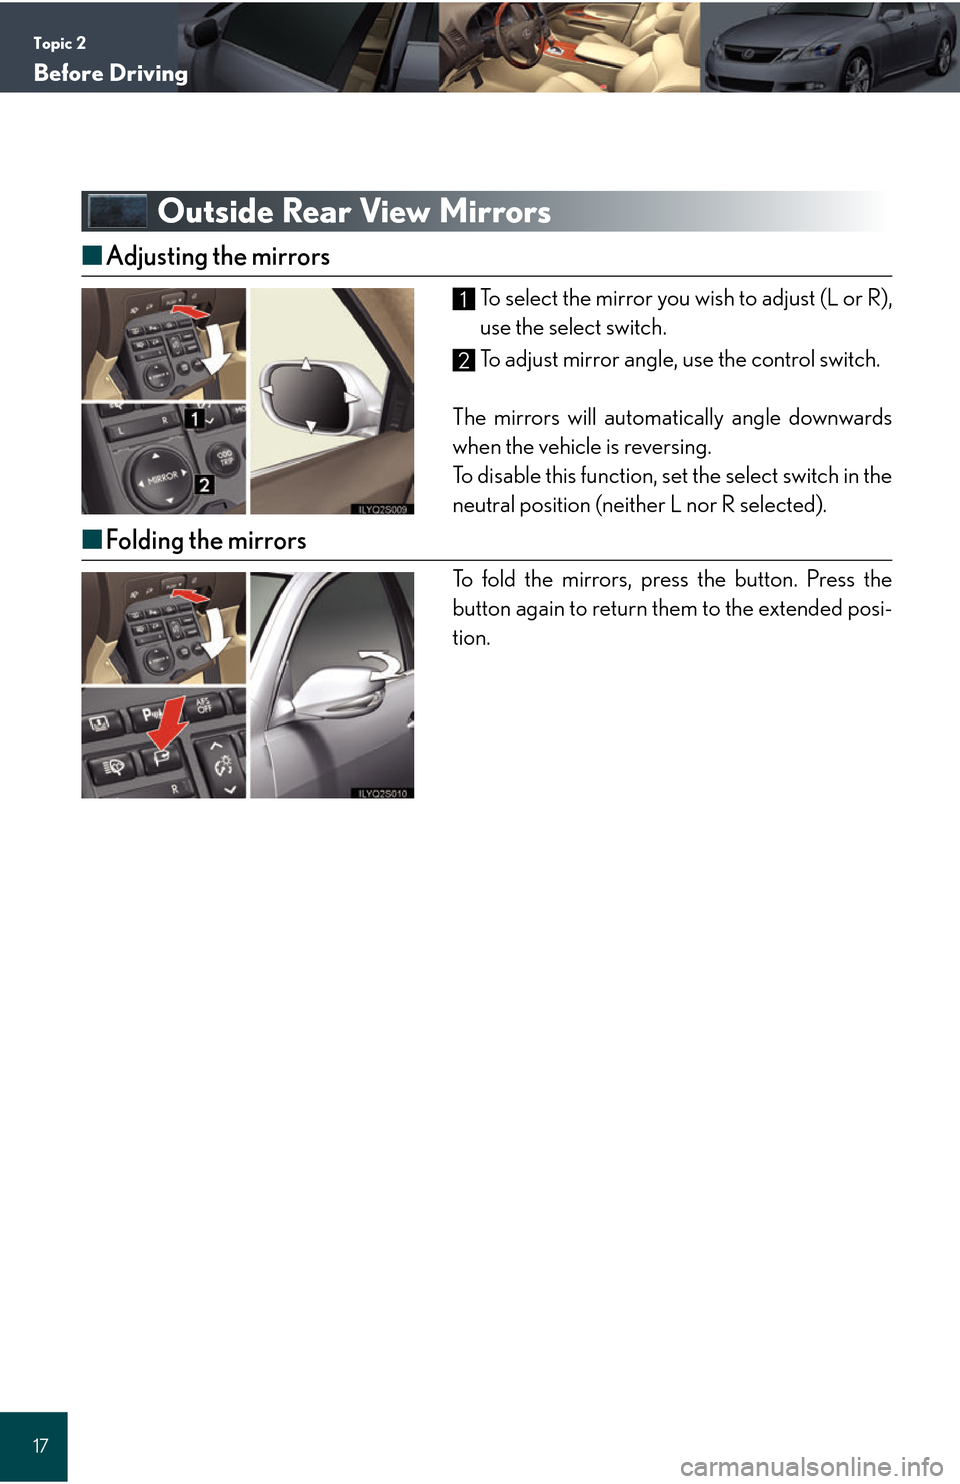 Lexus GS450h 2008  Using the audio system / LEXUS 2008 GS450H QUICK GUIDE  (OM30B13U) User Guide Topic 2
Before Driving
17
Outside Rear View Mirrors
■Adjusting the mirrors
To select the mirror you wish to adjust (L or R),
use the select switch.
To adjust mirror angle, use the control switch.
Th